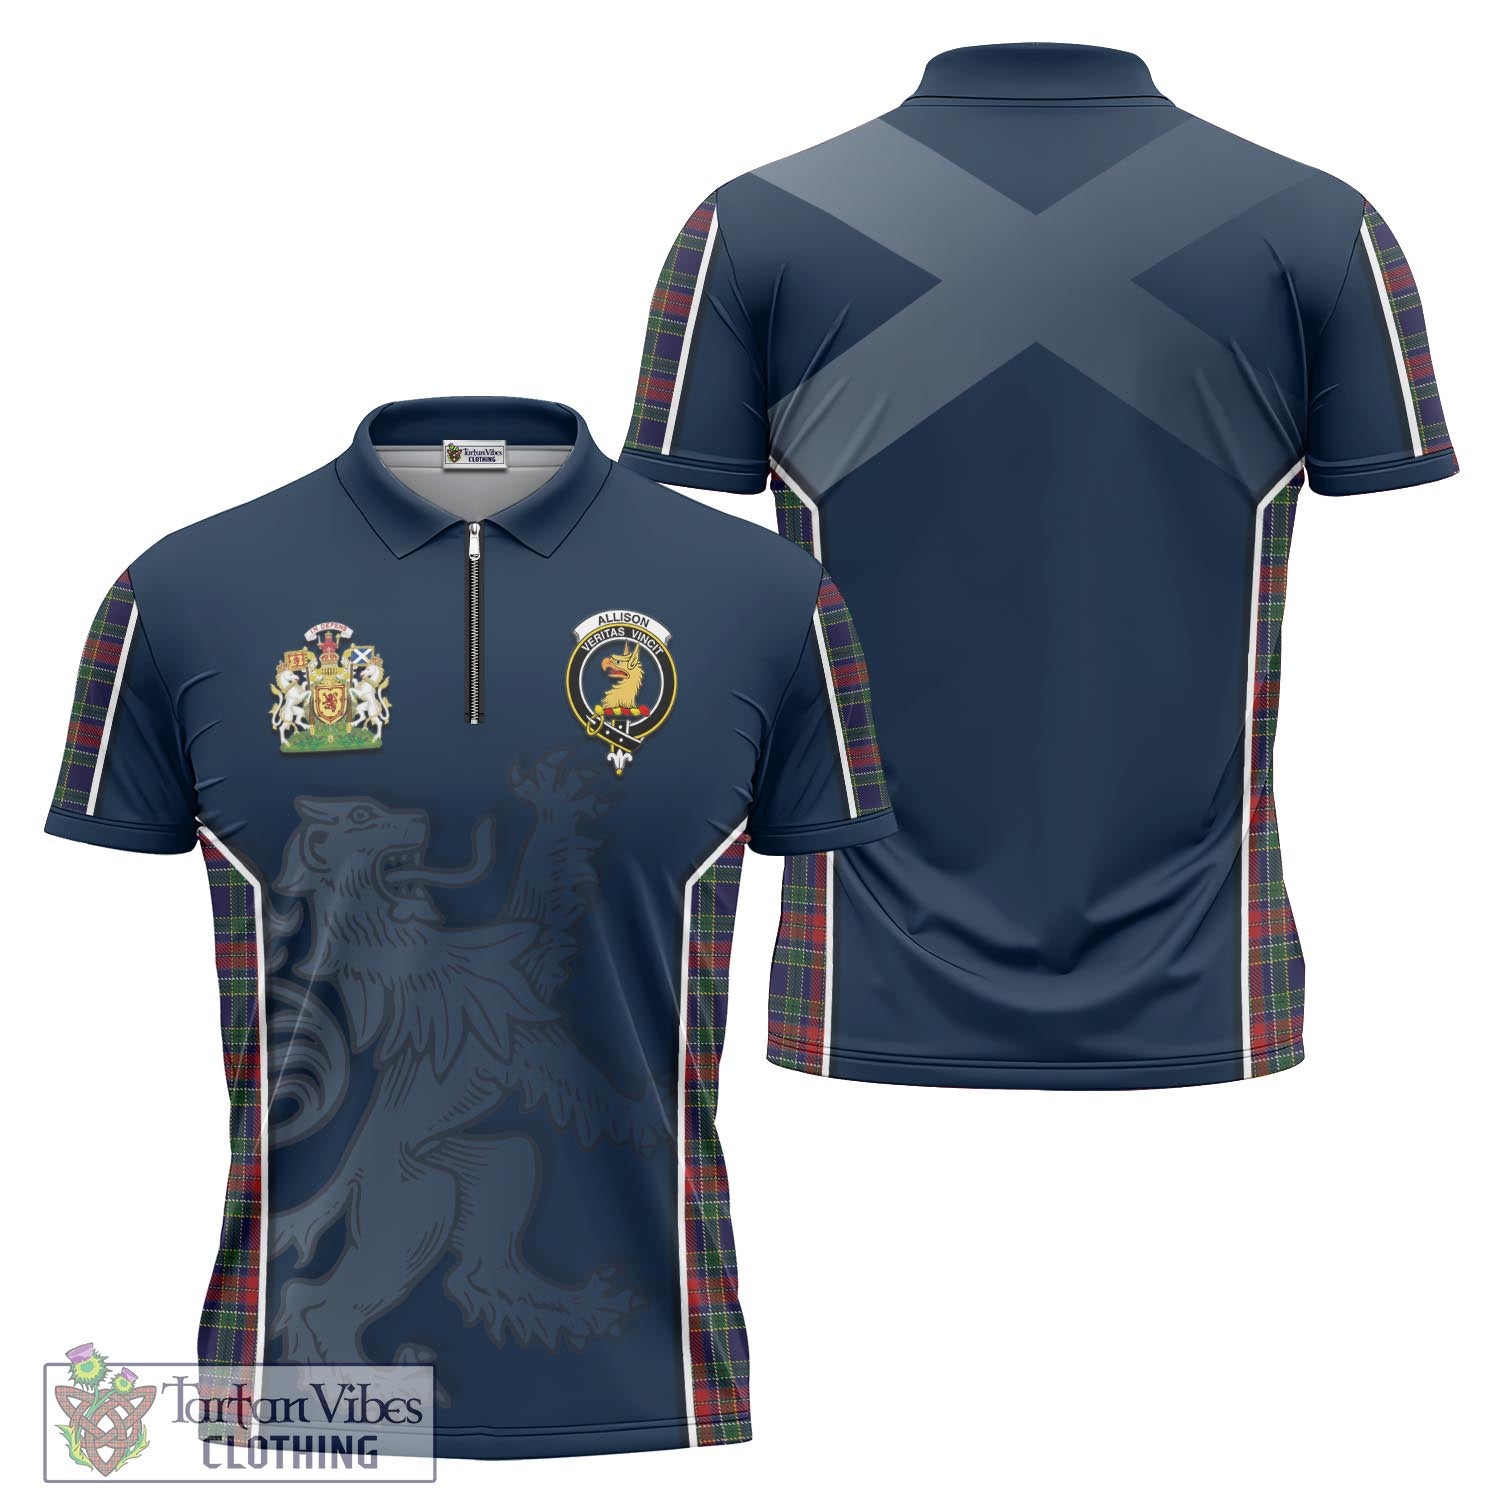 Tartan Vibes Clothing Allison Red Tartan Zipper Polo Shirt with Family Crest and Lion Rampant Vibes Sport Style